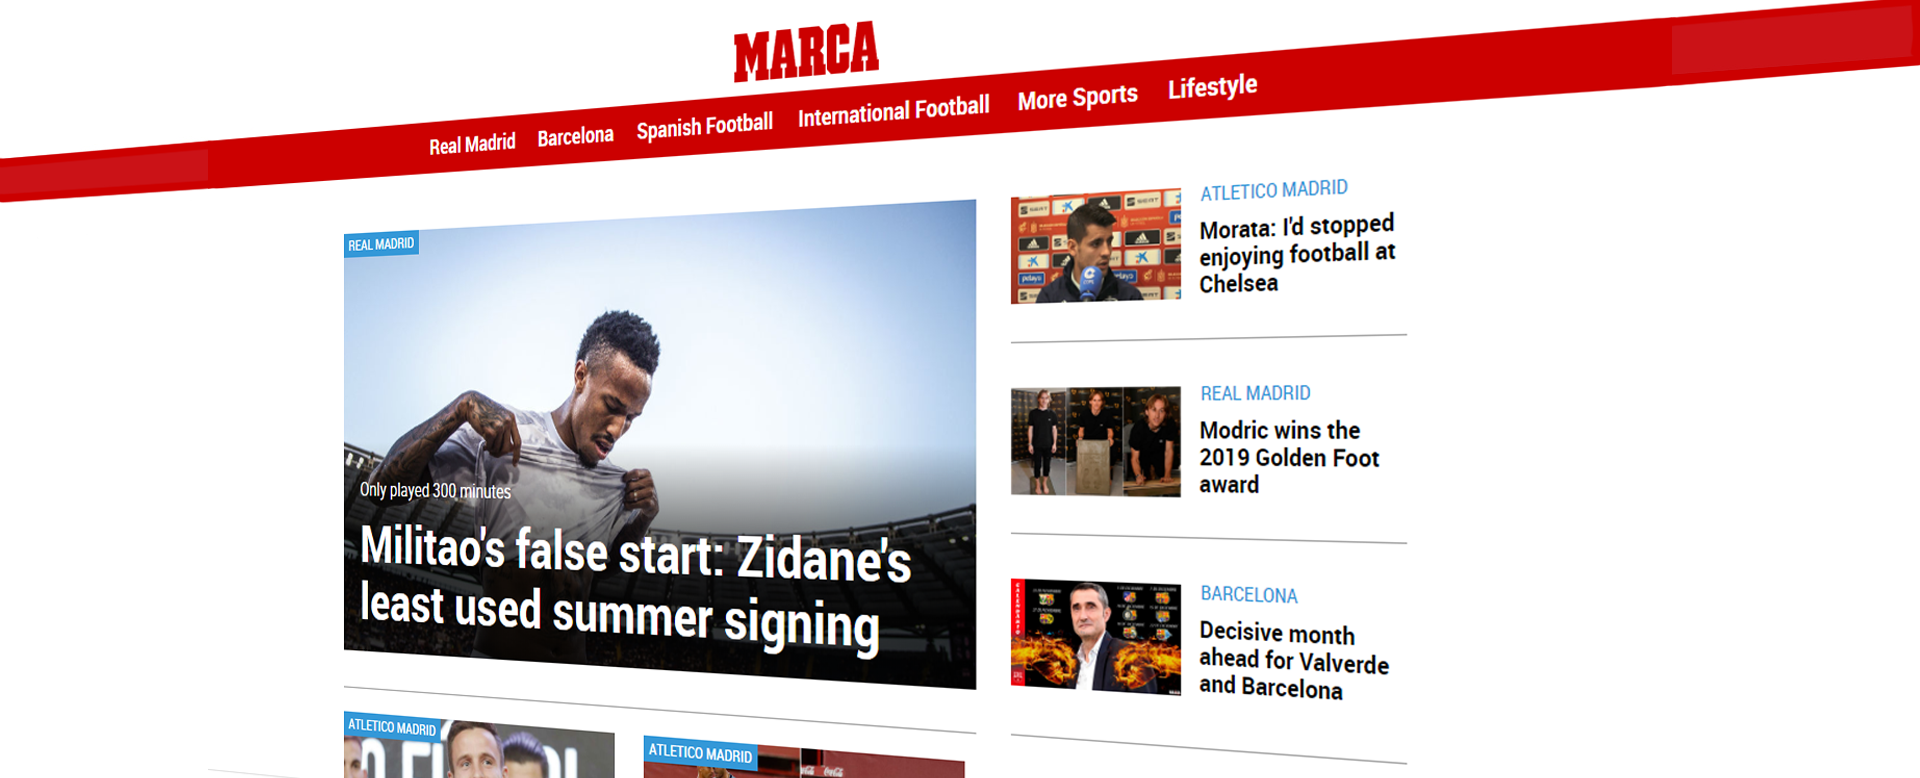 MARCA - Sports News Today & Live Sports in English